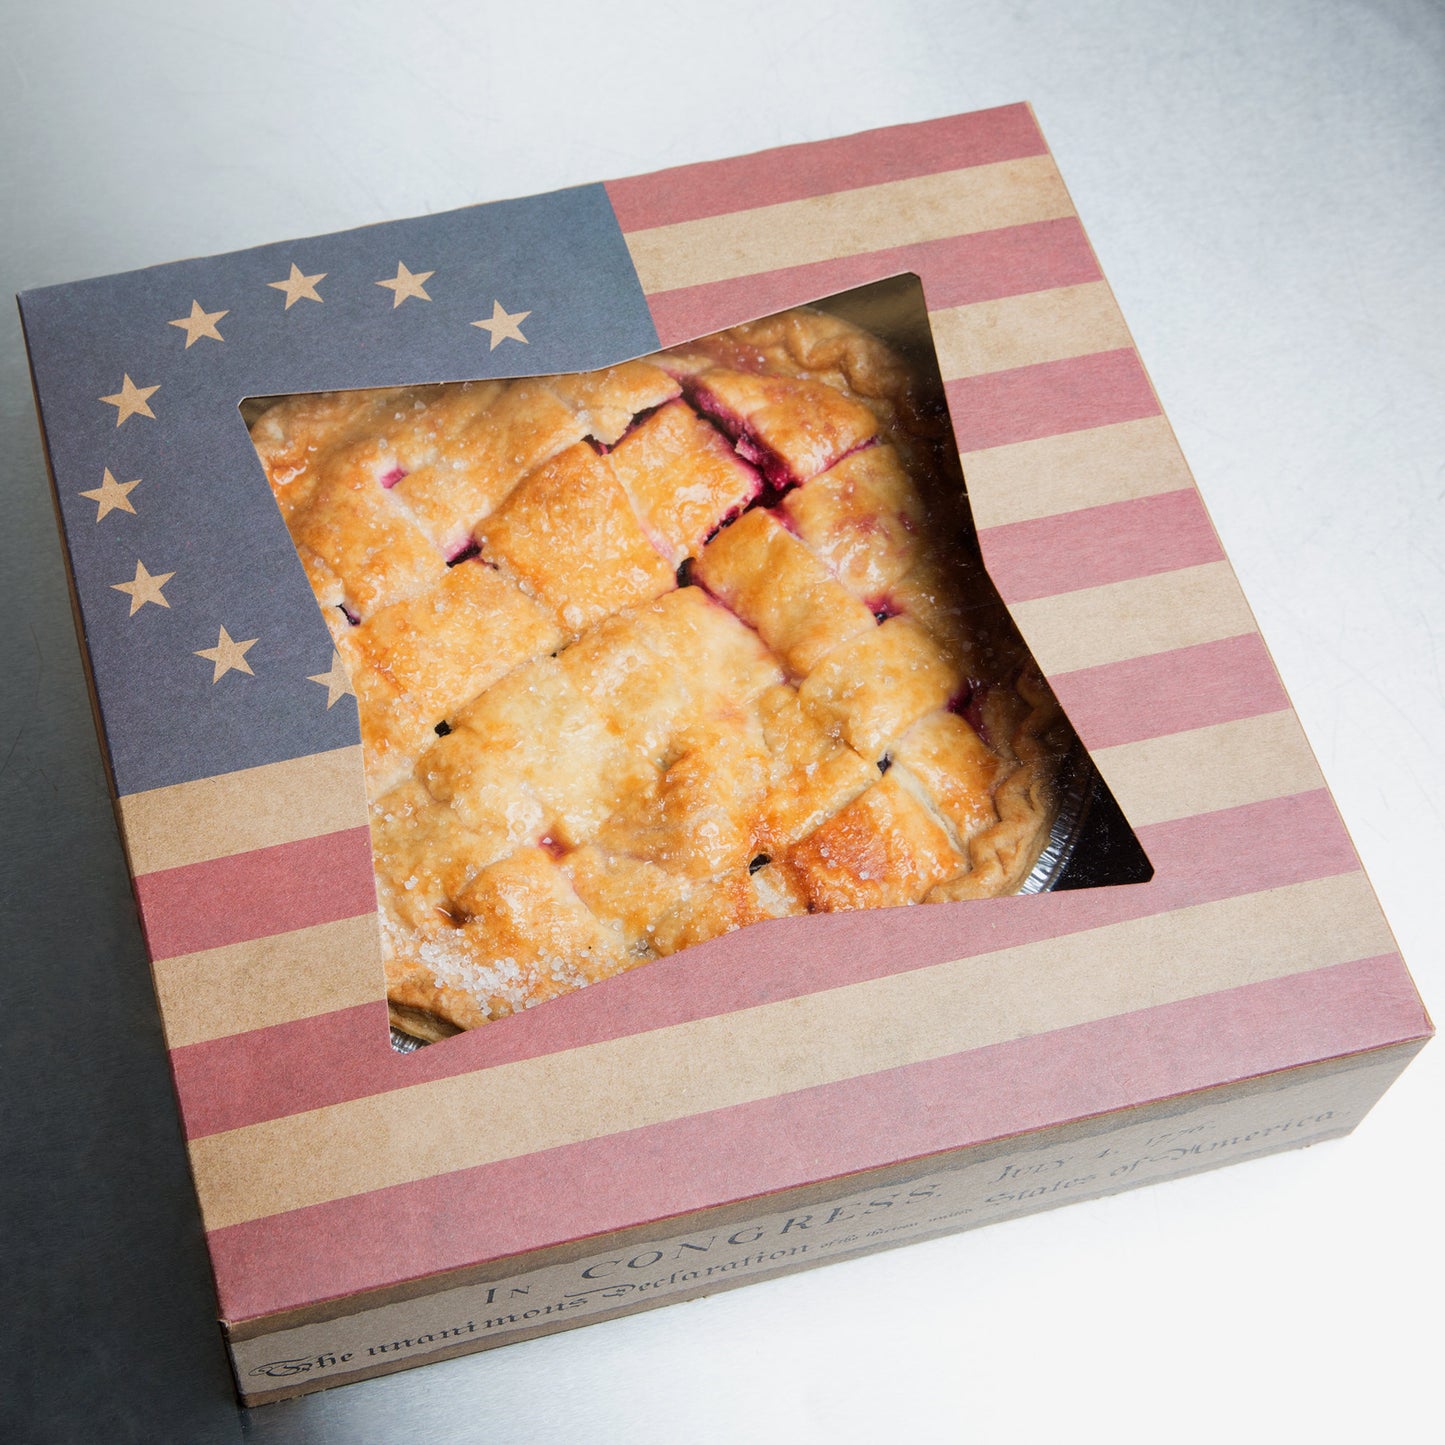 10 Inch Pie Box with American Flag